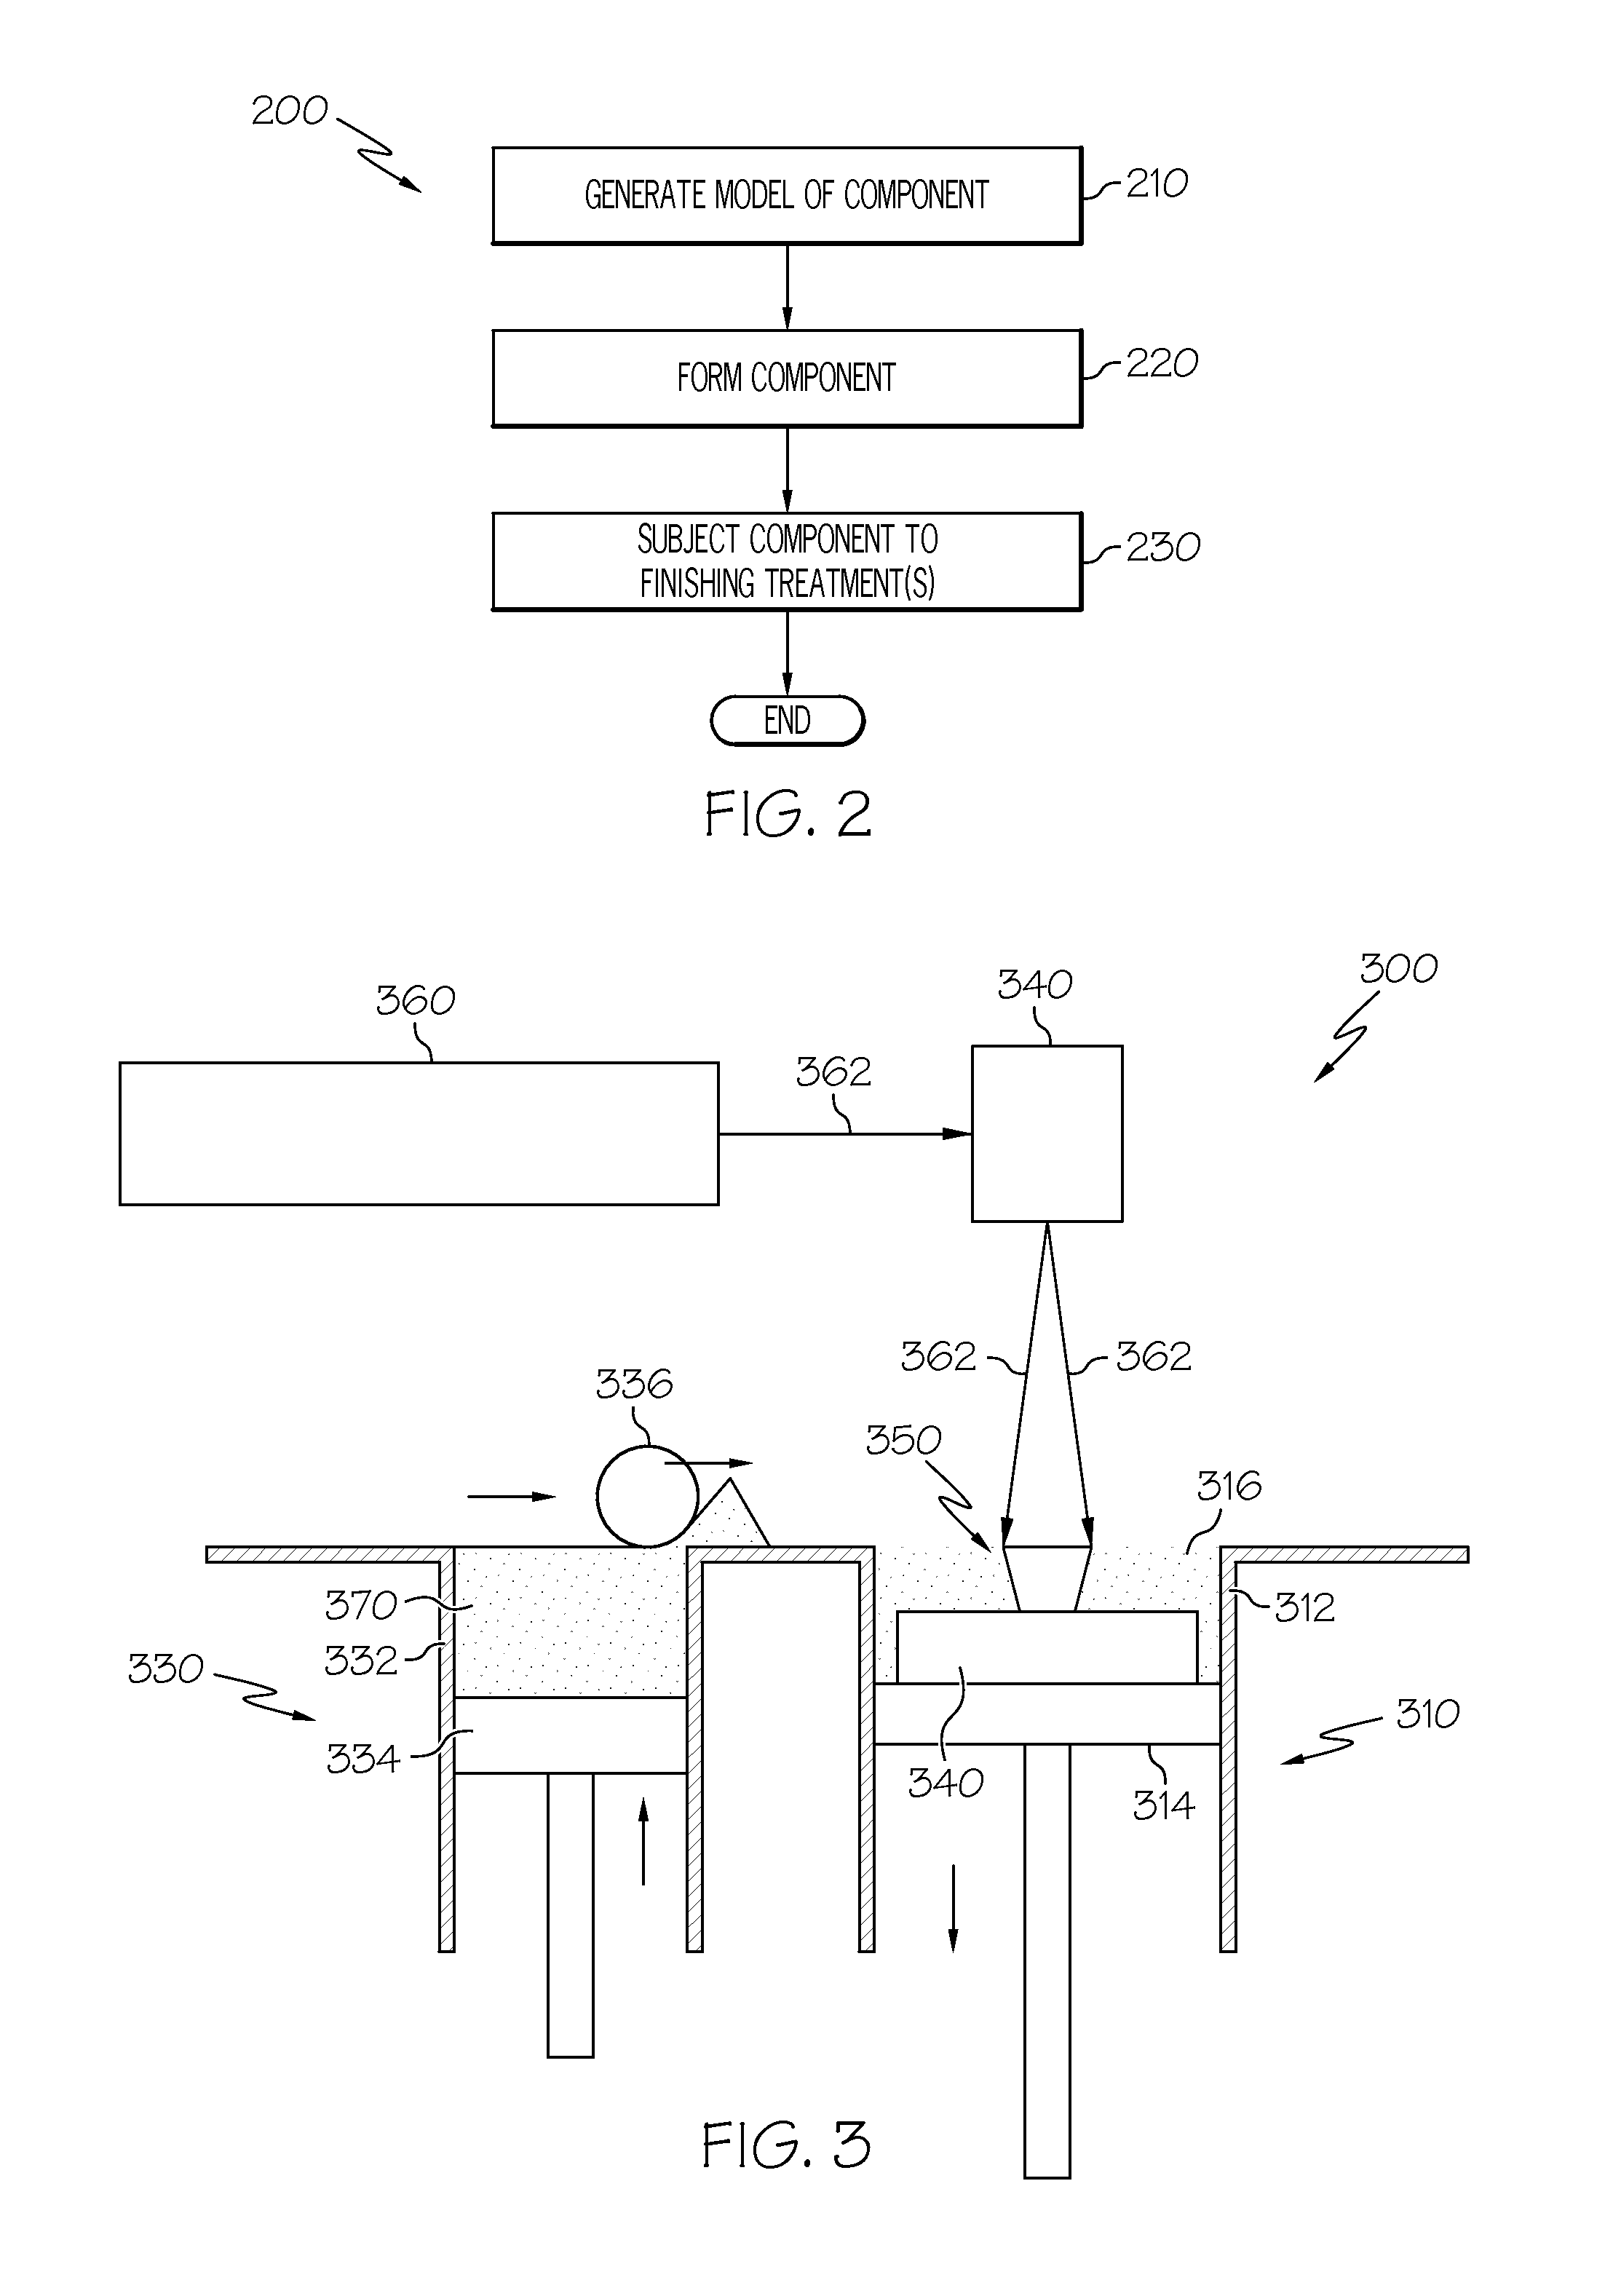 Gas turbine engine components and methods for their manufacture using additive manufacturing techniques